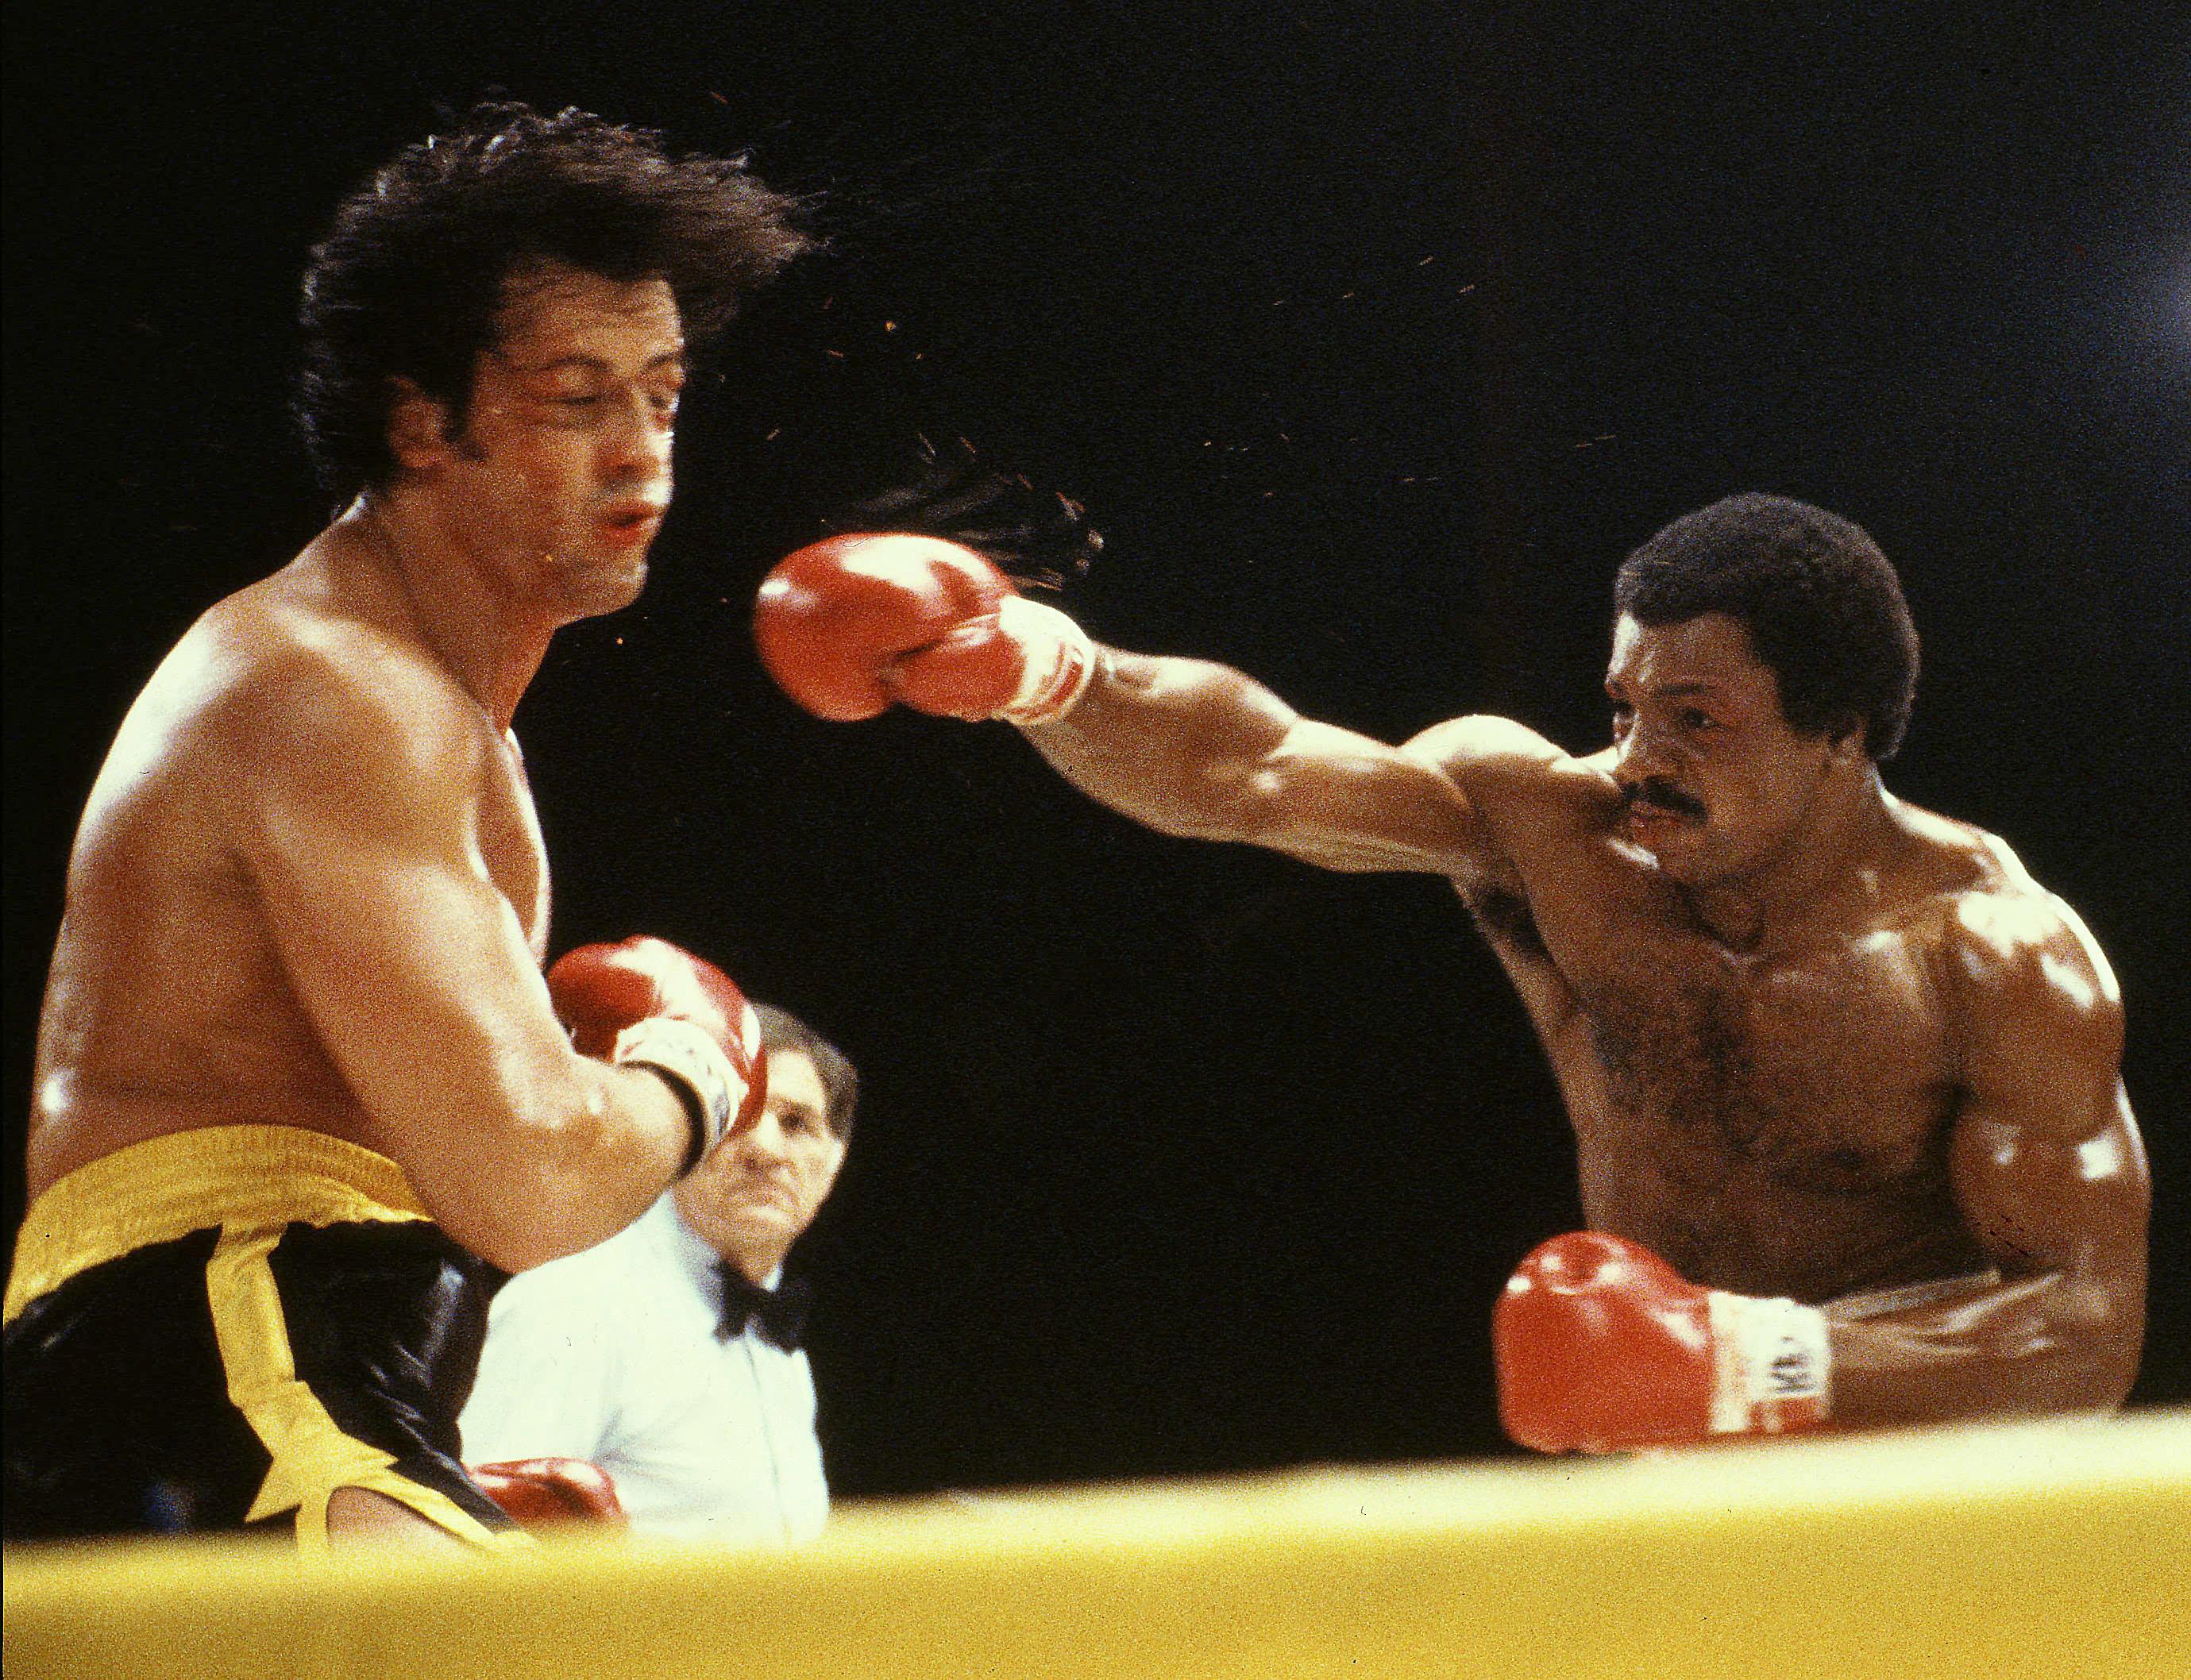  The Rocky franchise now boasts seven movies and has taken over $1.4 billion worldwide